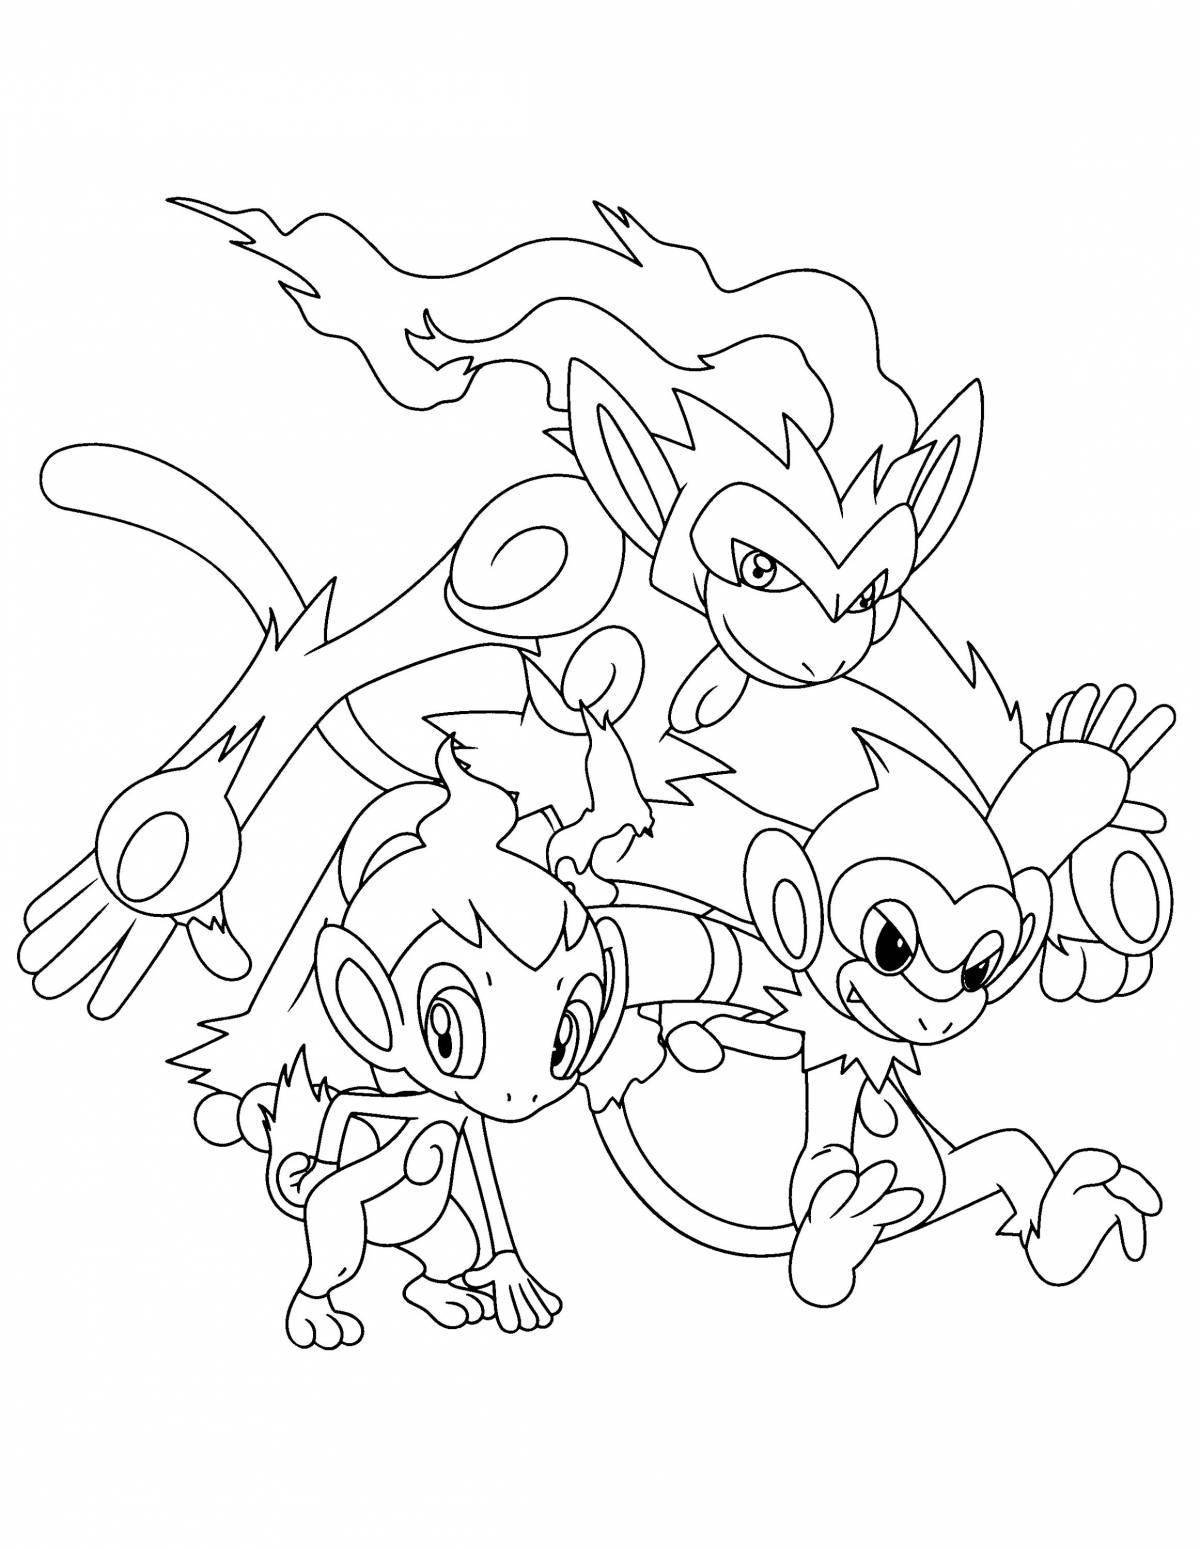 Chimchar live coloring page